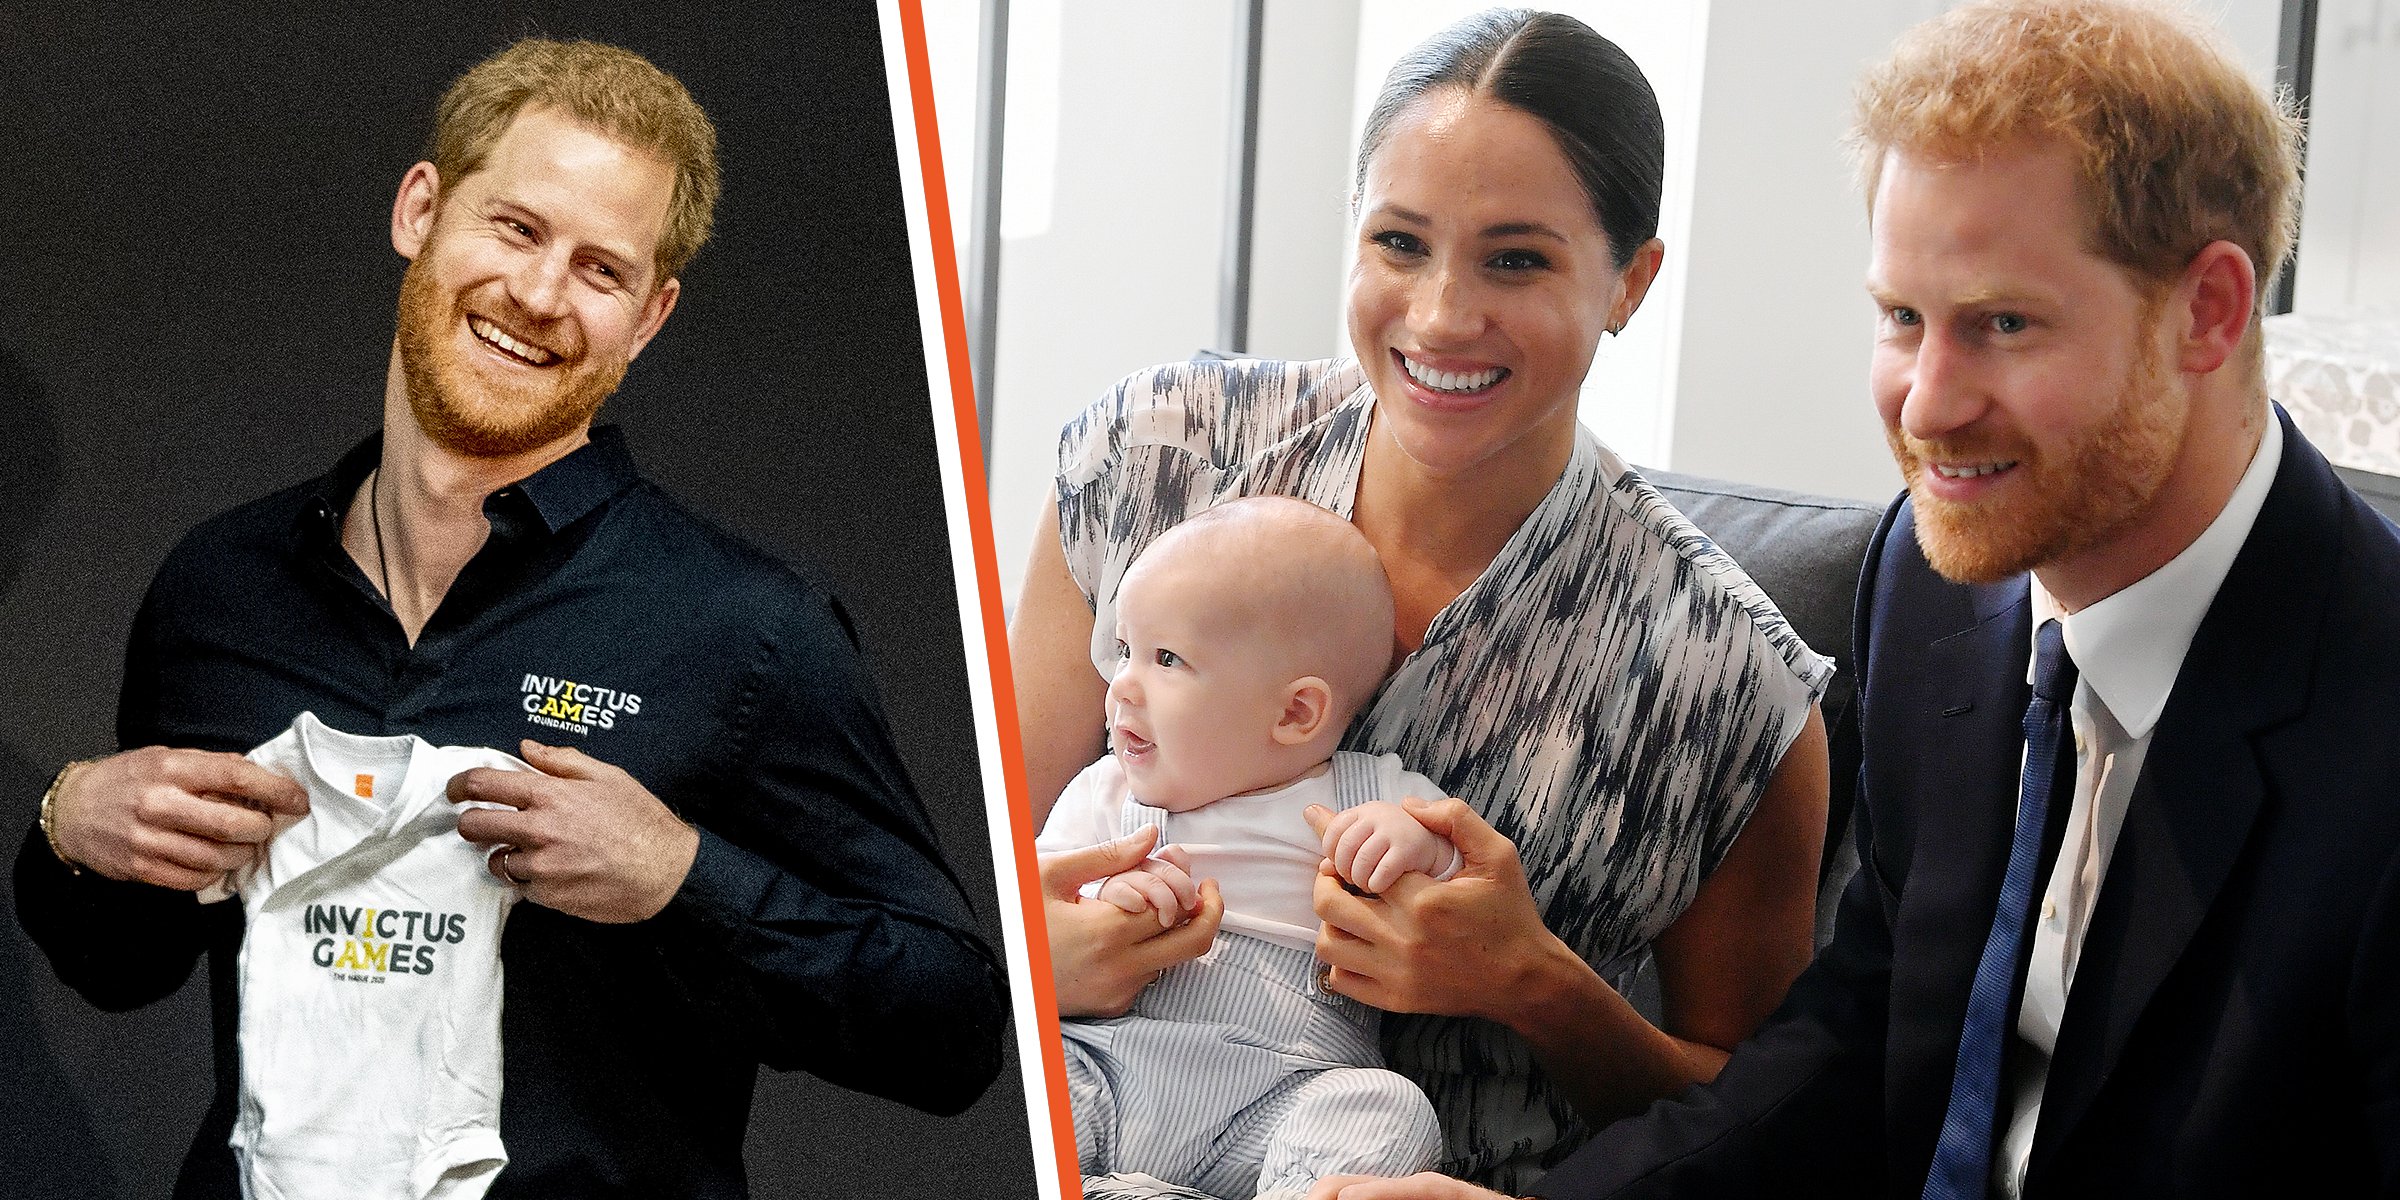 [Left] Prince Harry holding an Invictus Games baby grow for his then-newborn son Archie during the launch of the Invictus Games on May 9, 2019 in The Hague, Netherlands. [Right]  Prince Harry and Meghan Markle holding their son Archie Mountbatten-Windsor on September 25 2019  | Source: Getty Images 